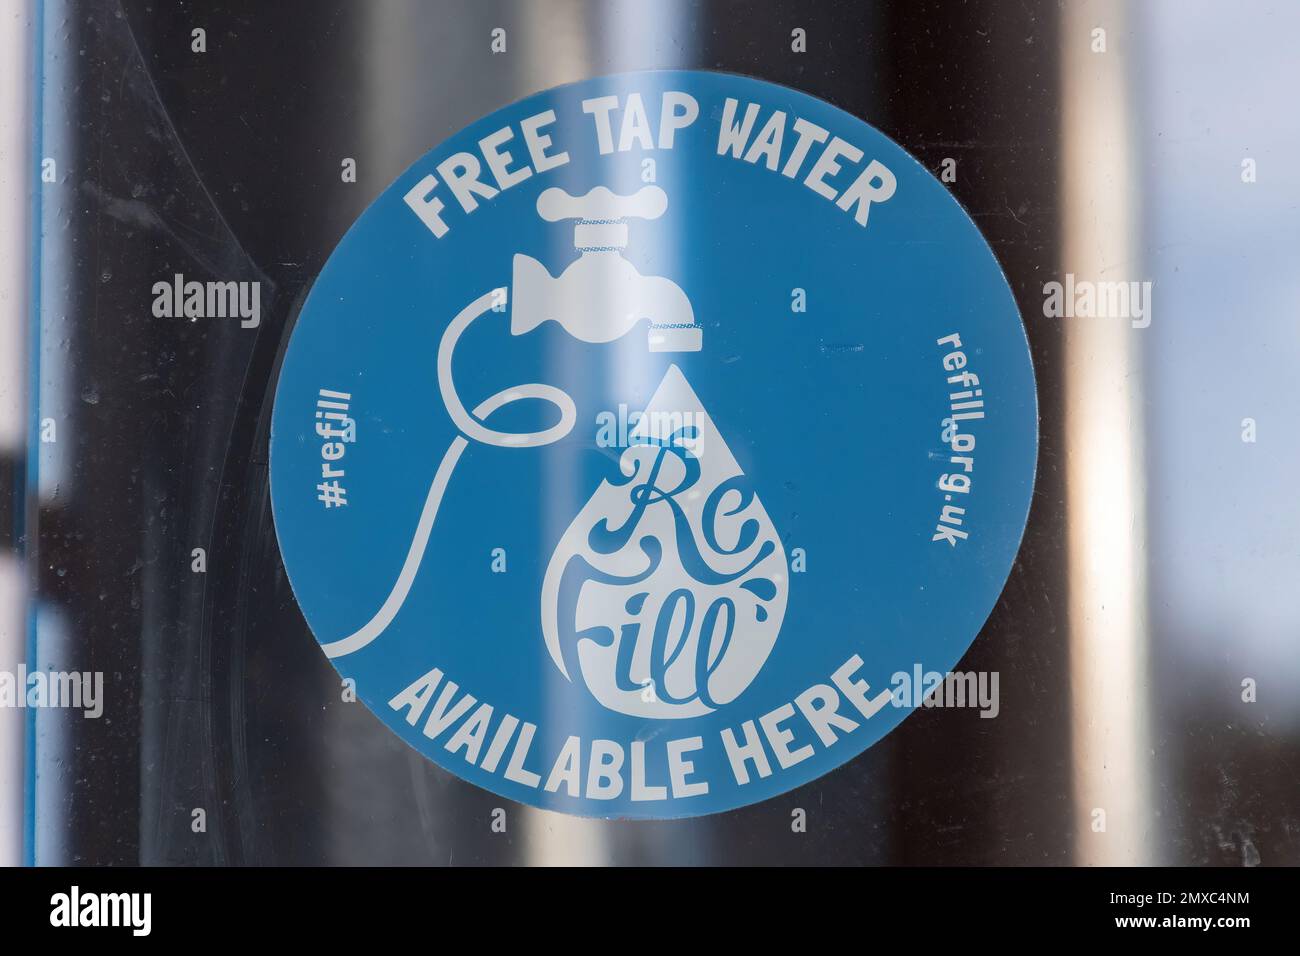 Free tap water available here, refill.org.uk sticker in cafe window, England, UK. To refill water bottles and reduce usage of single use plastics Stock Photo